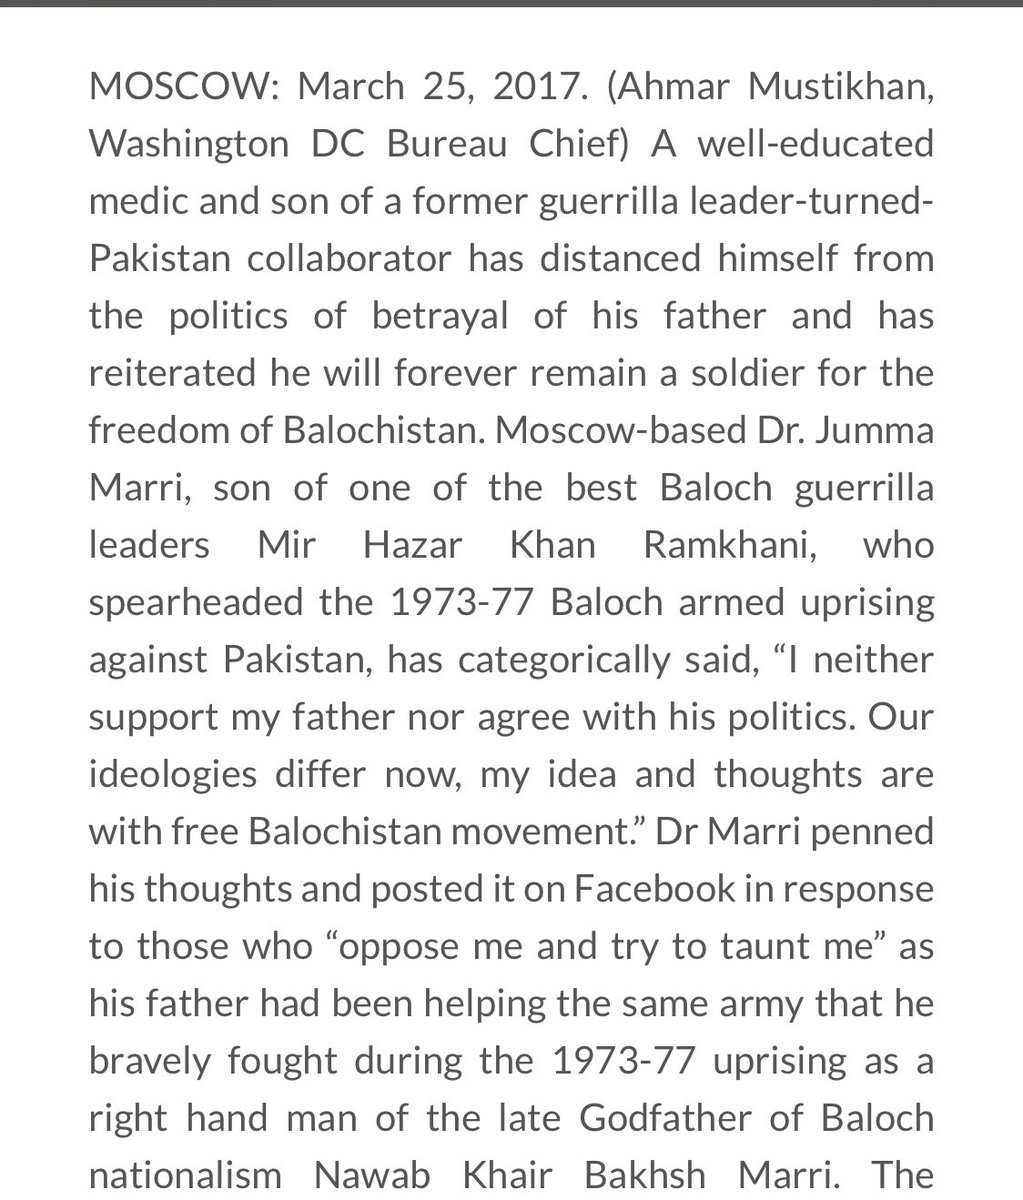 Jumma Khan Marri’s father Hazar Khan Marri later recognized the political bankruptcy of Marxist politics as Soviet Union collapsed, he rejoined mainstream Pakistani politics & became a campaigner against terrorism.However  #BLA cofounder Sher Mohammad Marri moved to India./35